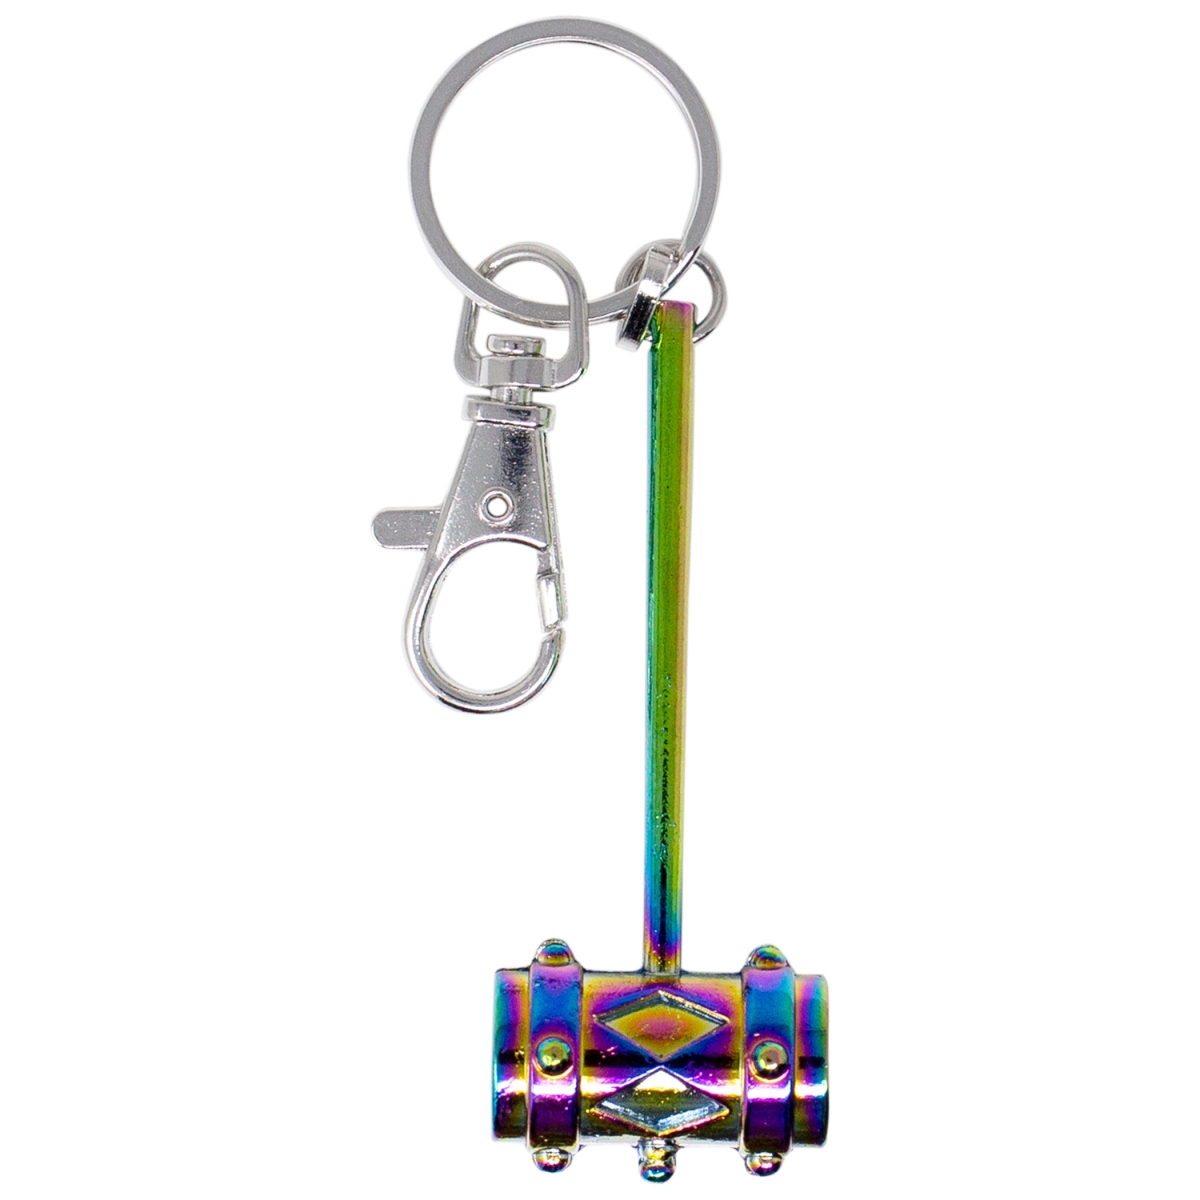 Picture of Harley Quinn 803079 Harley Quinns Mallet Keychain with Rainbow Metallic Finish